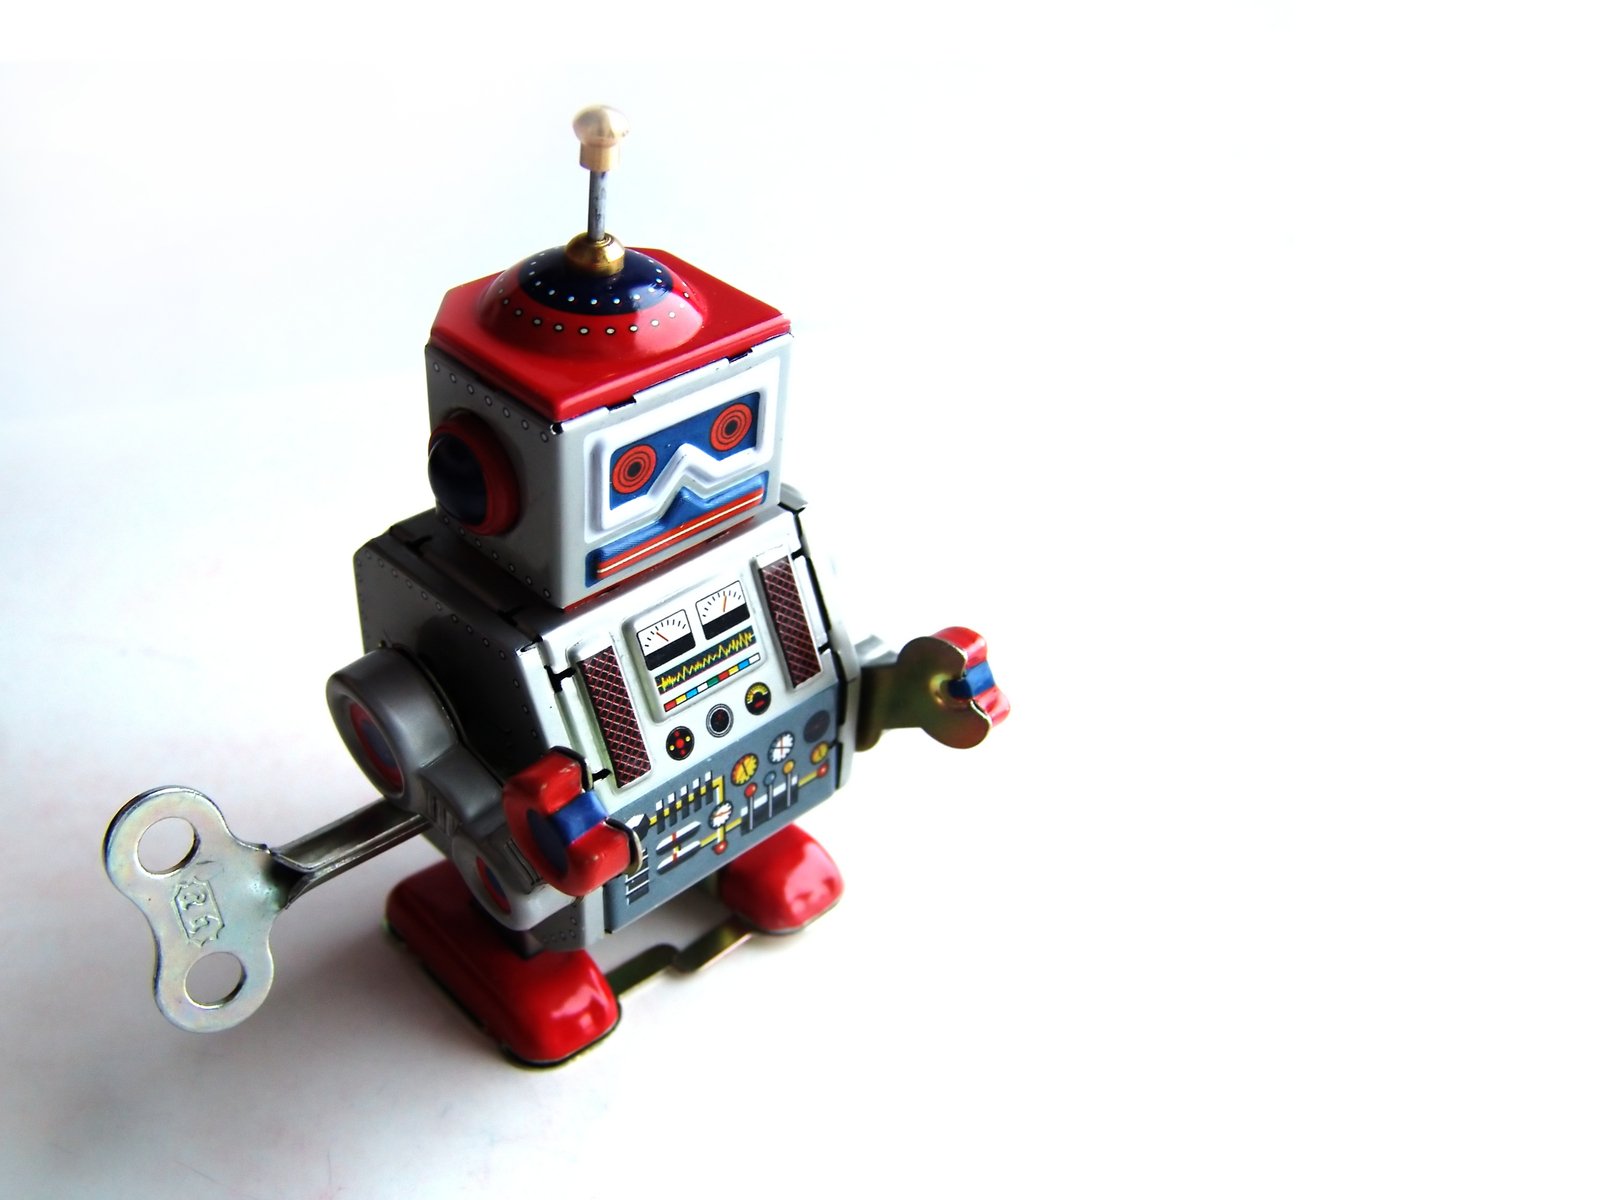 the little robot toy is red, grey and silver